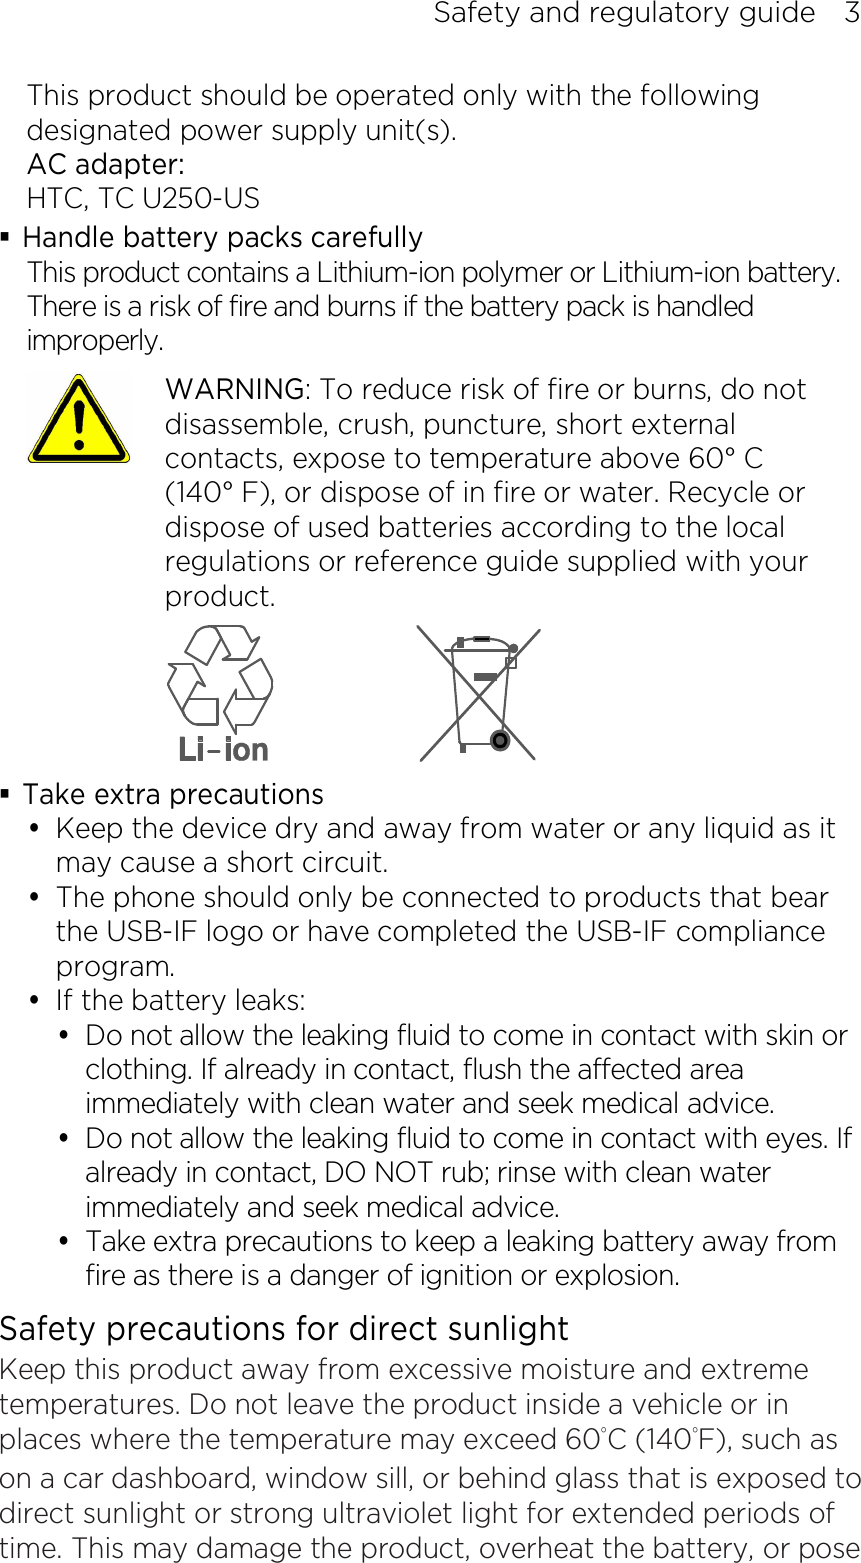 Safety and regulatory guide    3 This product should be operated only with the following designated power supply unit(s). AC adapter: HTC, TC U250-US  Handle battery packs carefully This product contains a Lithium-ion polymer or Lithium-ion battery. There is a risk of fire and burns if the battery pack is handled improperly.    WARNING: To reduce risk of fire or burns, do not disassemble, crush, puncture, short external contacts, expose to temperature above 60° C   (140° F), or dispose of in fire or water. Recycle or dispose of used batteries according to the local regulations or reference guide supplied with your product.   Take extra precautions  Keep the device dry and away from water or any liquid as it may cause a short circuit.  The phone should only be connected to products that bear the USB-IF logo or have completed the USB-IF compliance program.  If the battery leaks:    Do not allow the leaking fluid to come in contact with skin or clothing. If already in contact, flush the affected area immediately with clean water and seek medical advice.    Do not allow the leaking fluid to come in contact with eyes. If already in contact, DO NOT rub; rinse with clean water immediately and seek medical advice.    Take extra precautions to keep a leaking battery away from fire as there is a danger of ignition or explosion.   Safety precautions for direct sunlight Keep this product away from excessive moisture and extreme temperatures. Do not leave the product inside a vehicle or in places where the temperature may exceed 60°C (140°F), such as on a car dashboard, window sill, or behind glass that is exposed to direct sunlight or strong ultraviolet light for extended periods of time. This may damage the product, overheat the battery, or pose 